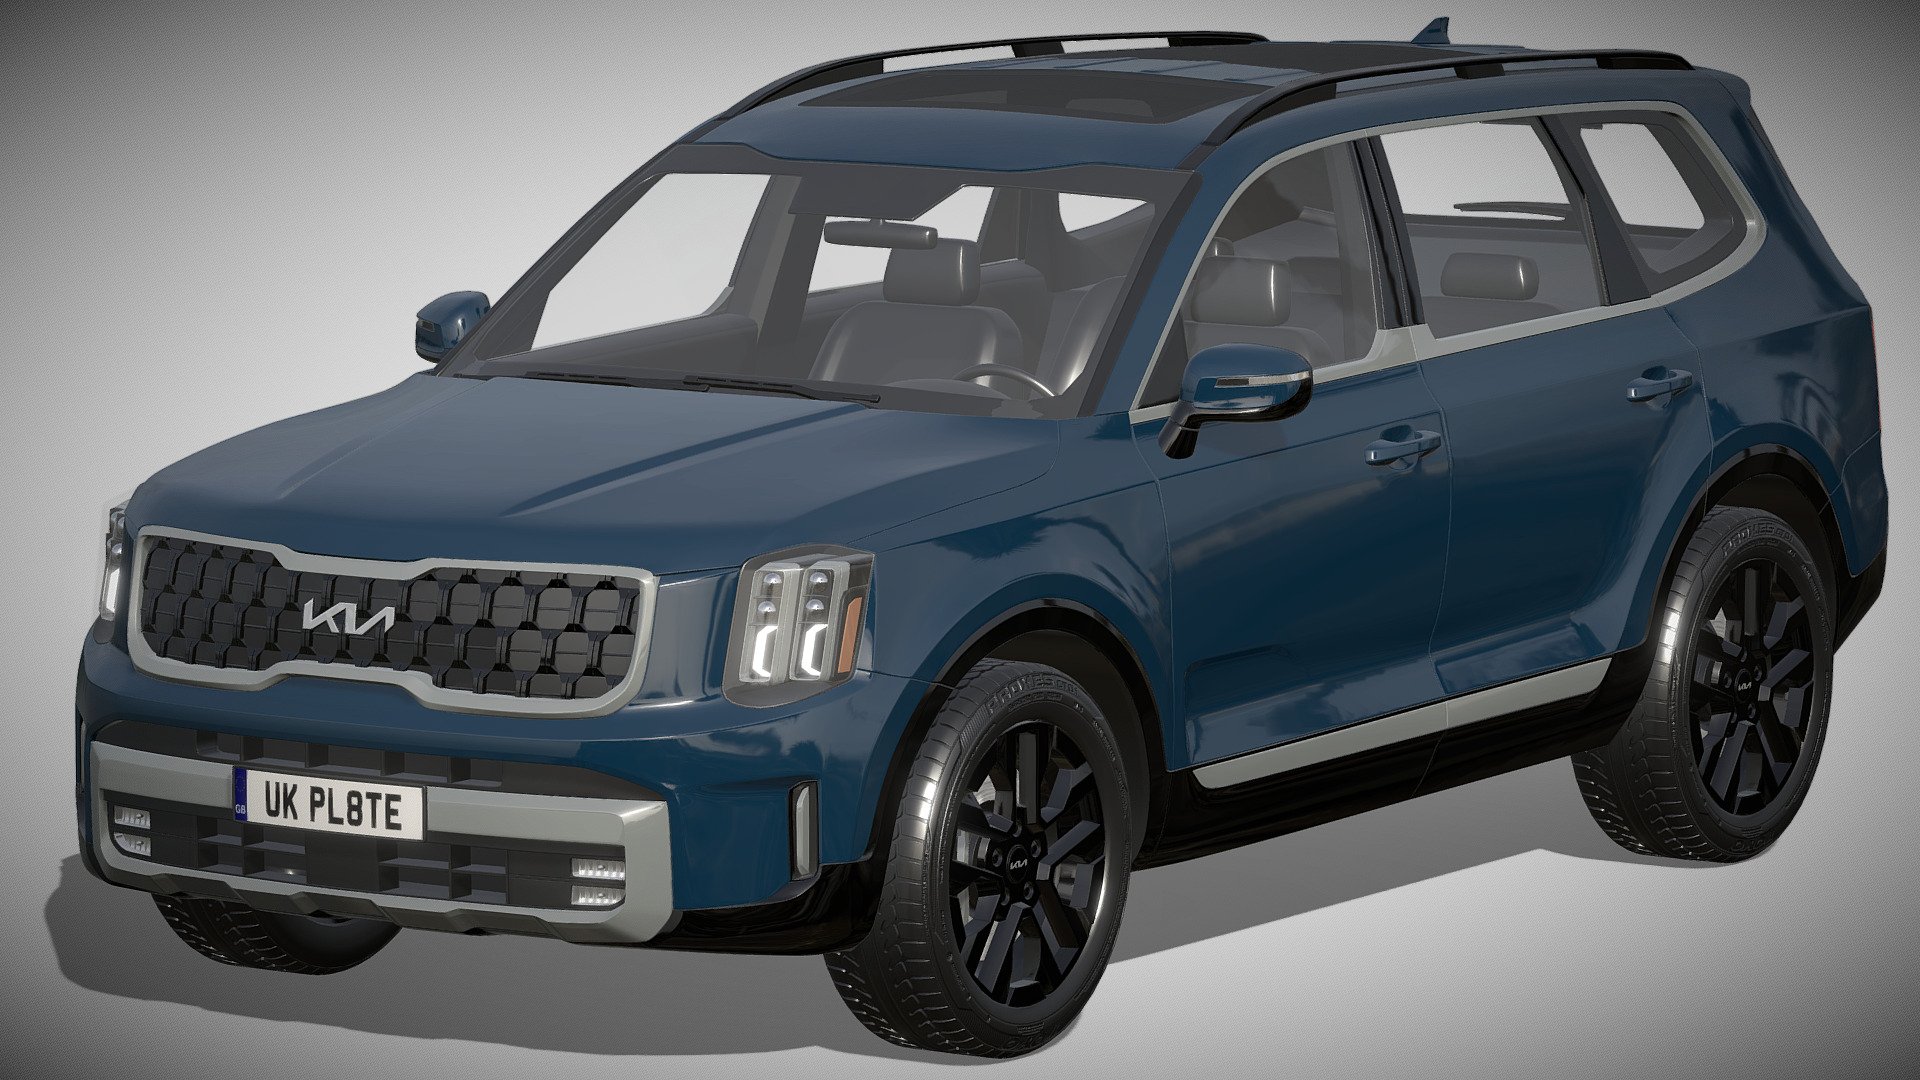 Kia Telluride 2023

https://www.kia.com/us/en/telluride

Clean geometry Light weight model, yet completely detailed for HI-Res renders. Use for movies, Advertisements or games

Corona render and materials

All textures include in *.rar files

Lighting setup is not included in the file! - Kia Telluride 2023 - Buy Royalty Free 3D model by zifir3d 3d model